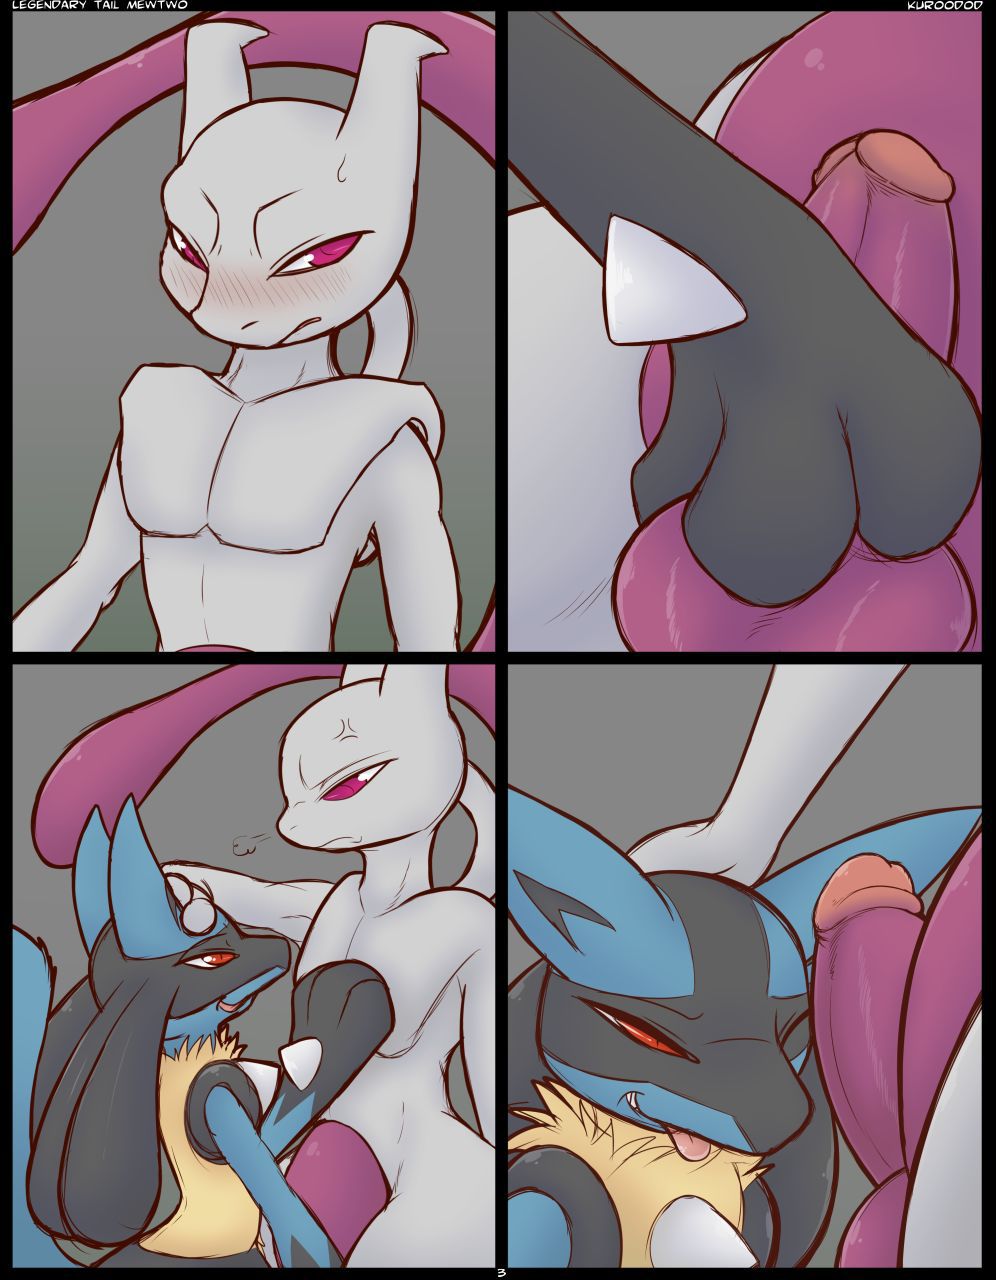 Legendary Tail 2 - Mewtwo by Kuroodod (Ongoing) 4